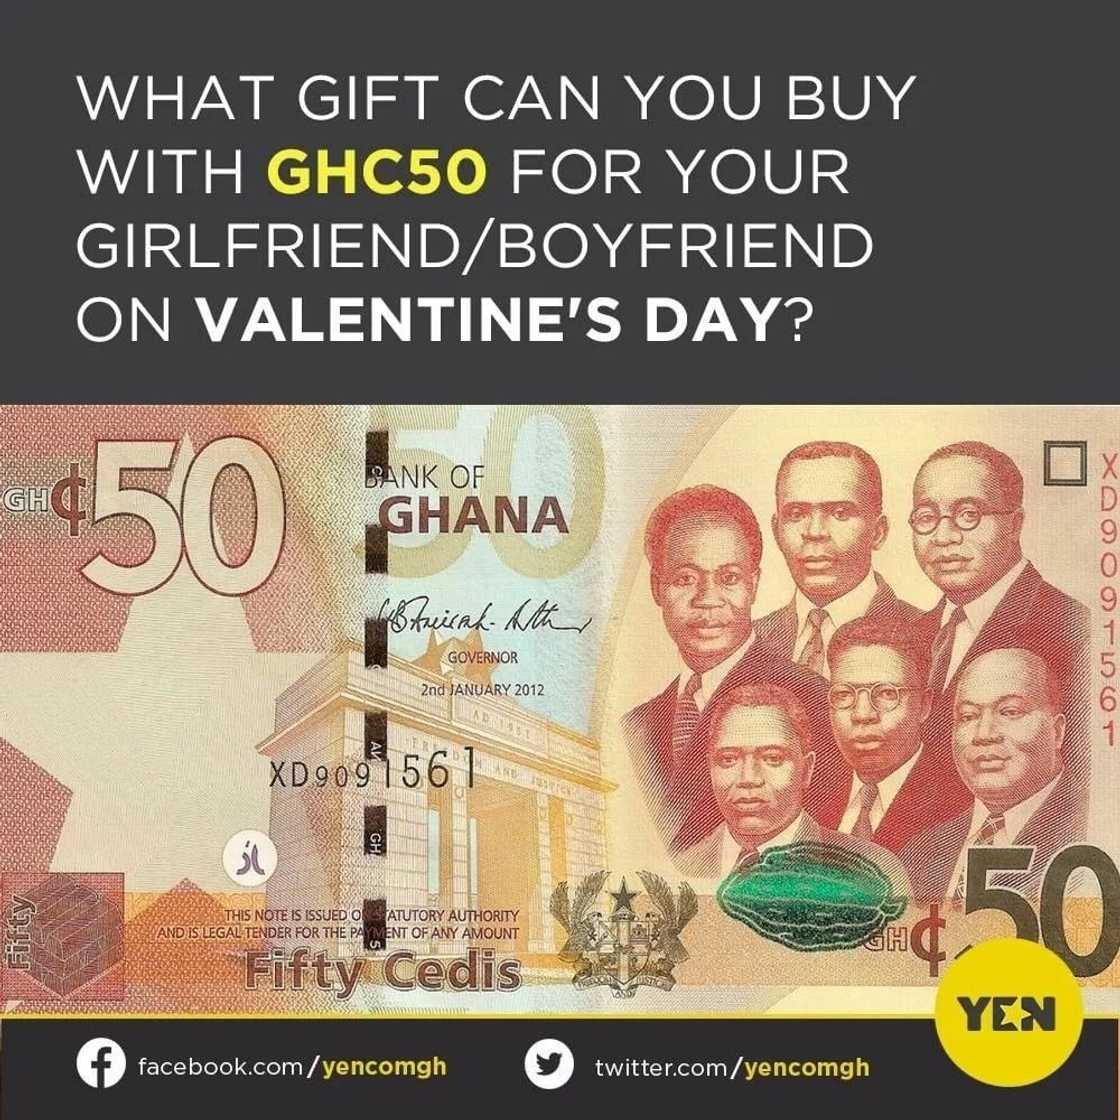 YEN readers state what they can buy for their lovers on Valentine’s Day with GHC50